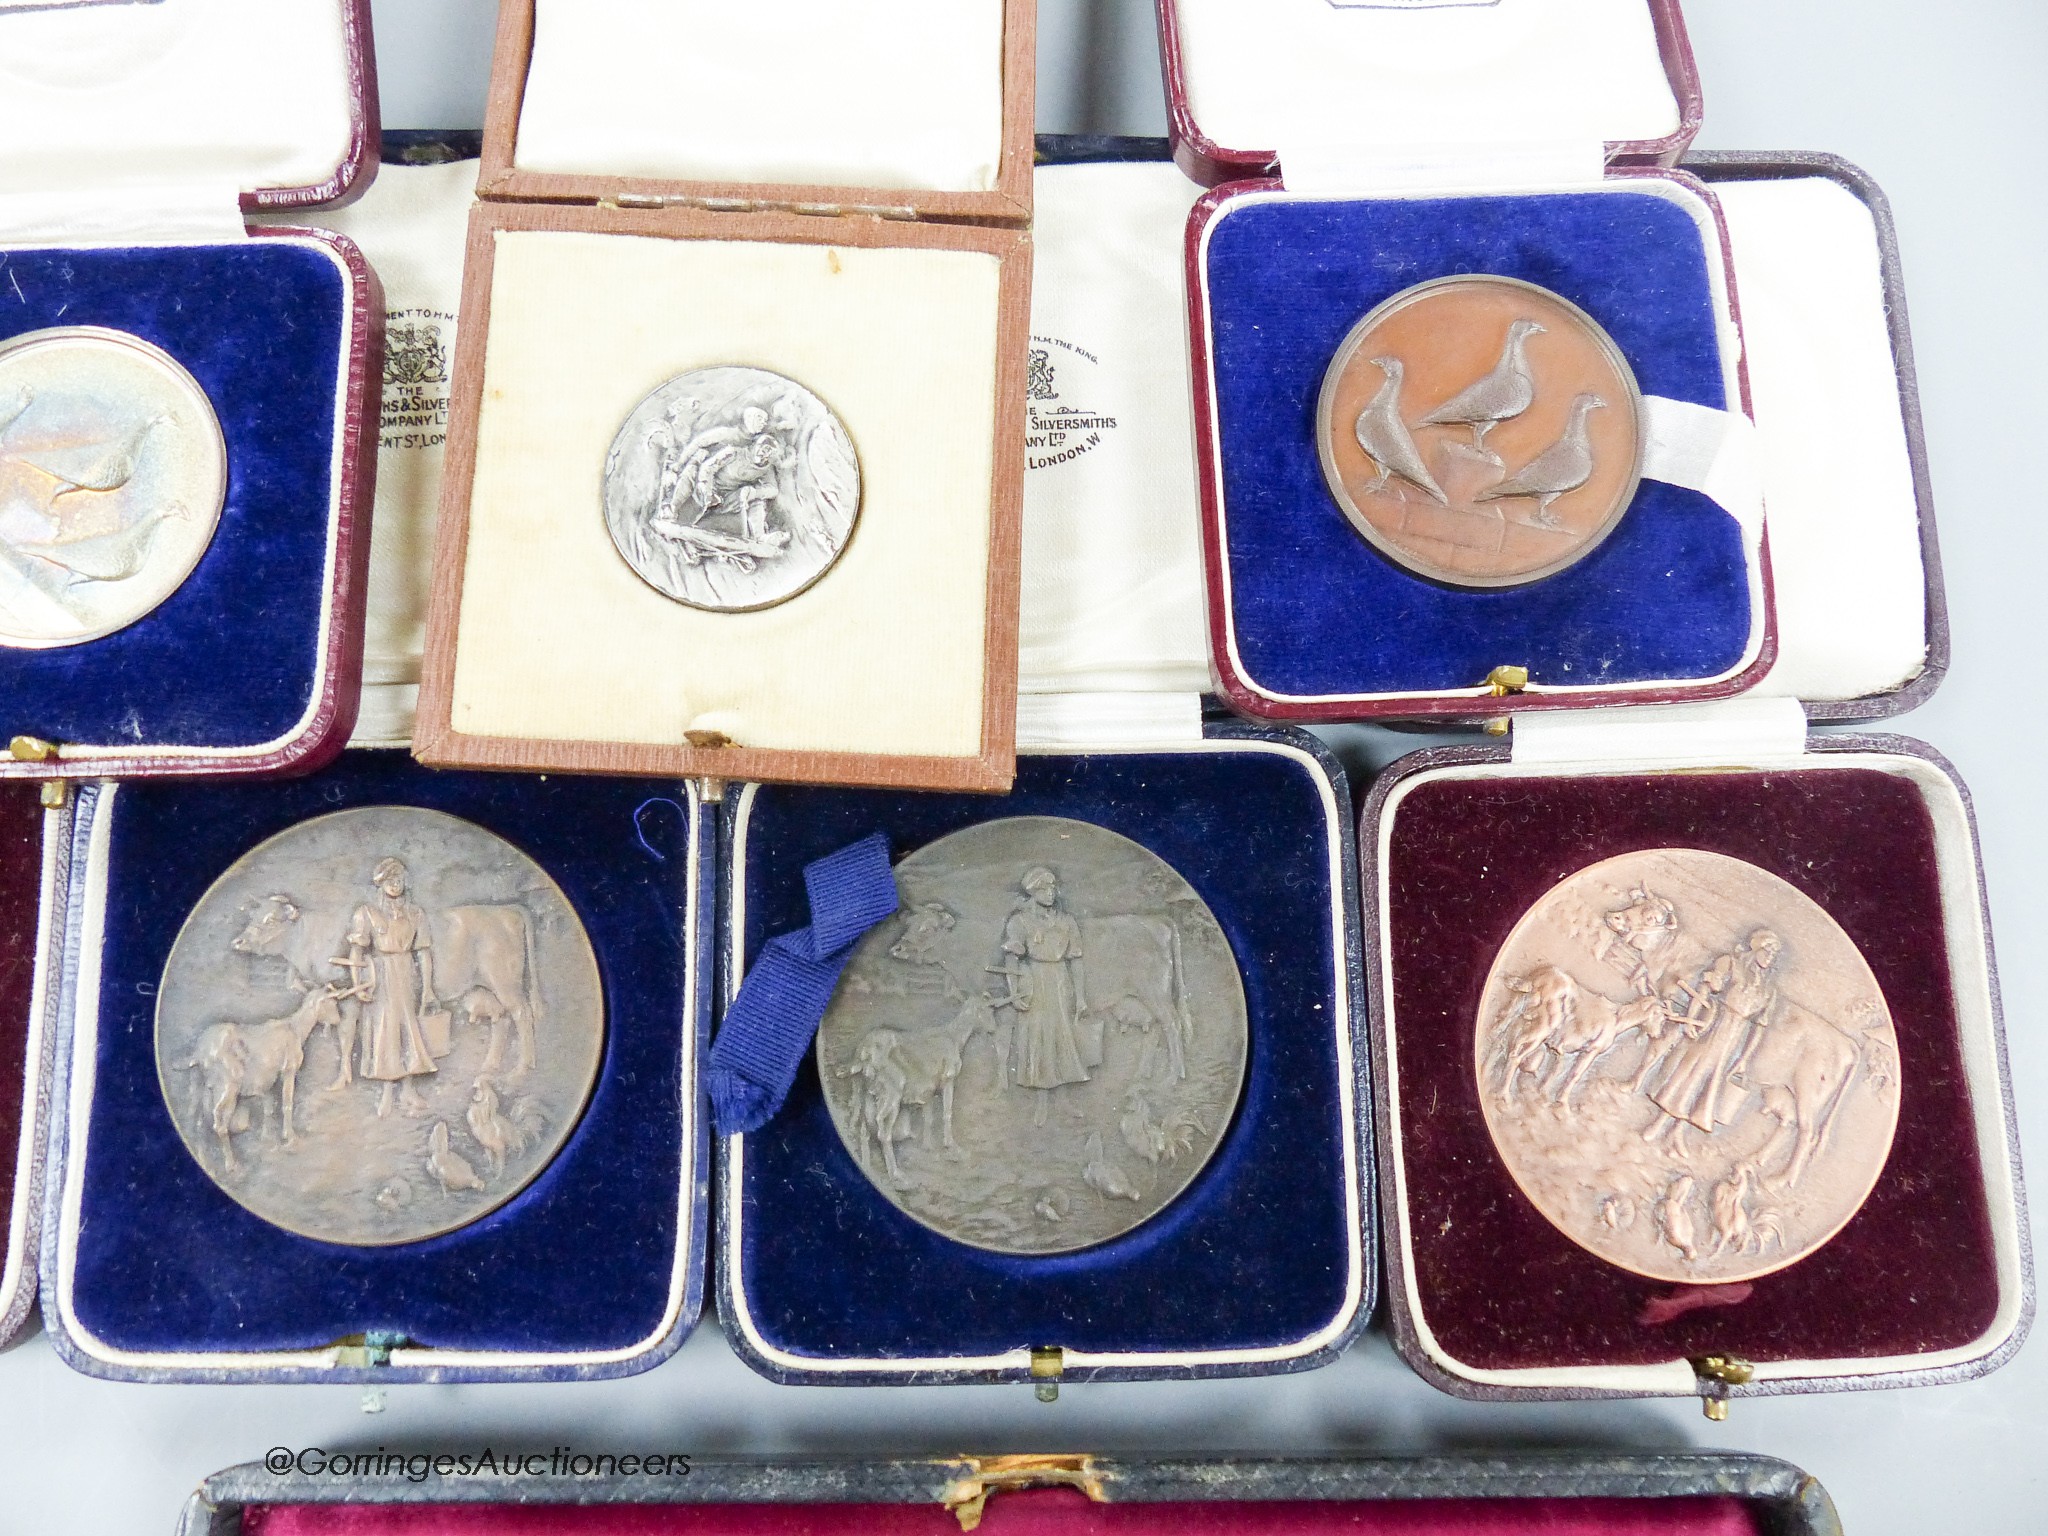 A collection of Dragoon Pigeon-related and other medals